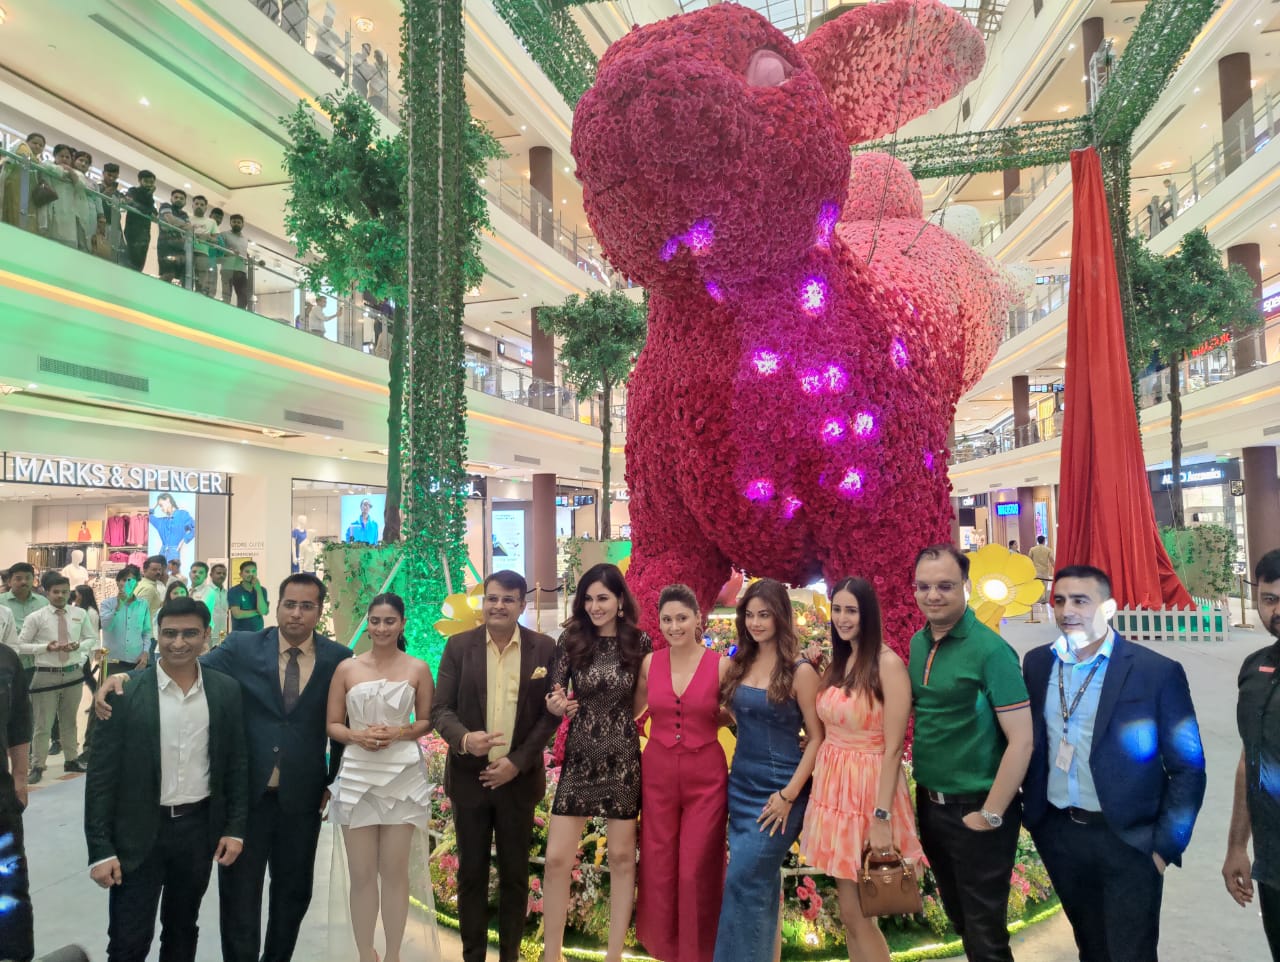 The magic of "Bunny Land" spread with the country's largest rabbit installation at Phoenix Palacio